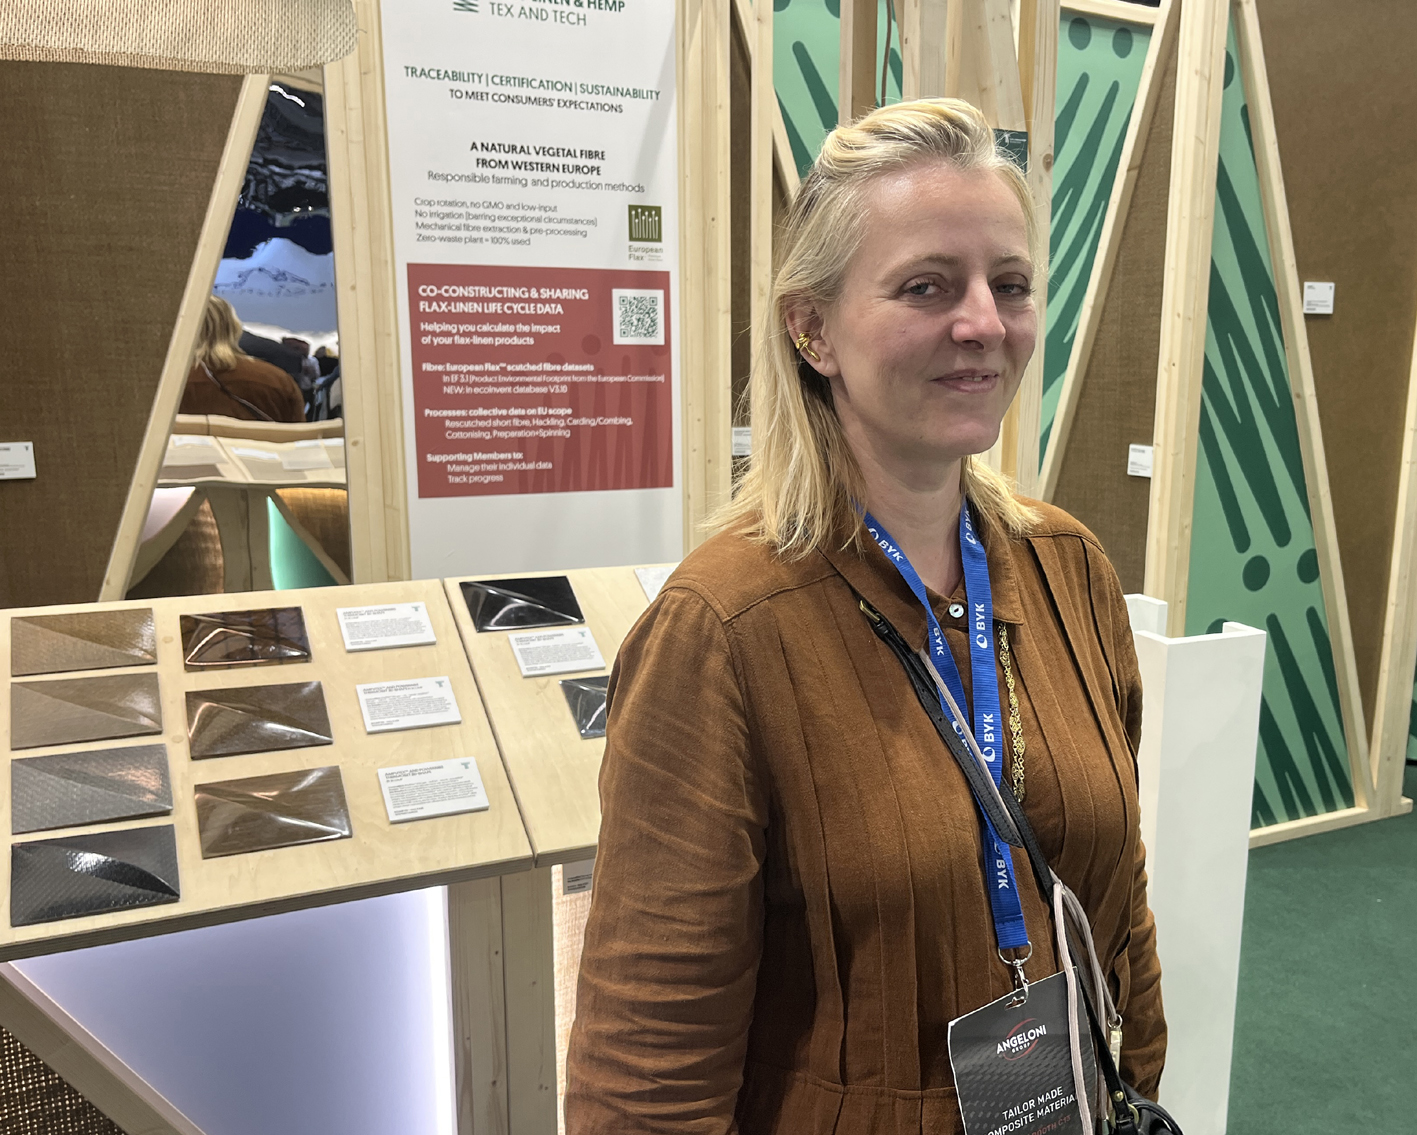 Alliance of Flax-Linen and Hemp innovation and CSR director Julie Pariset: “Solutions now meet and exceed the expectations of manufacturers for performance in the automotive sector.” © A.Wilson